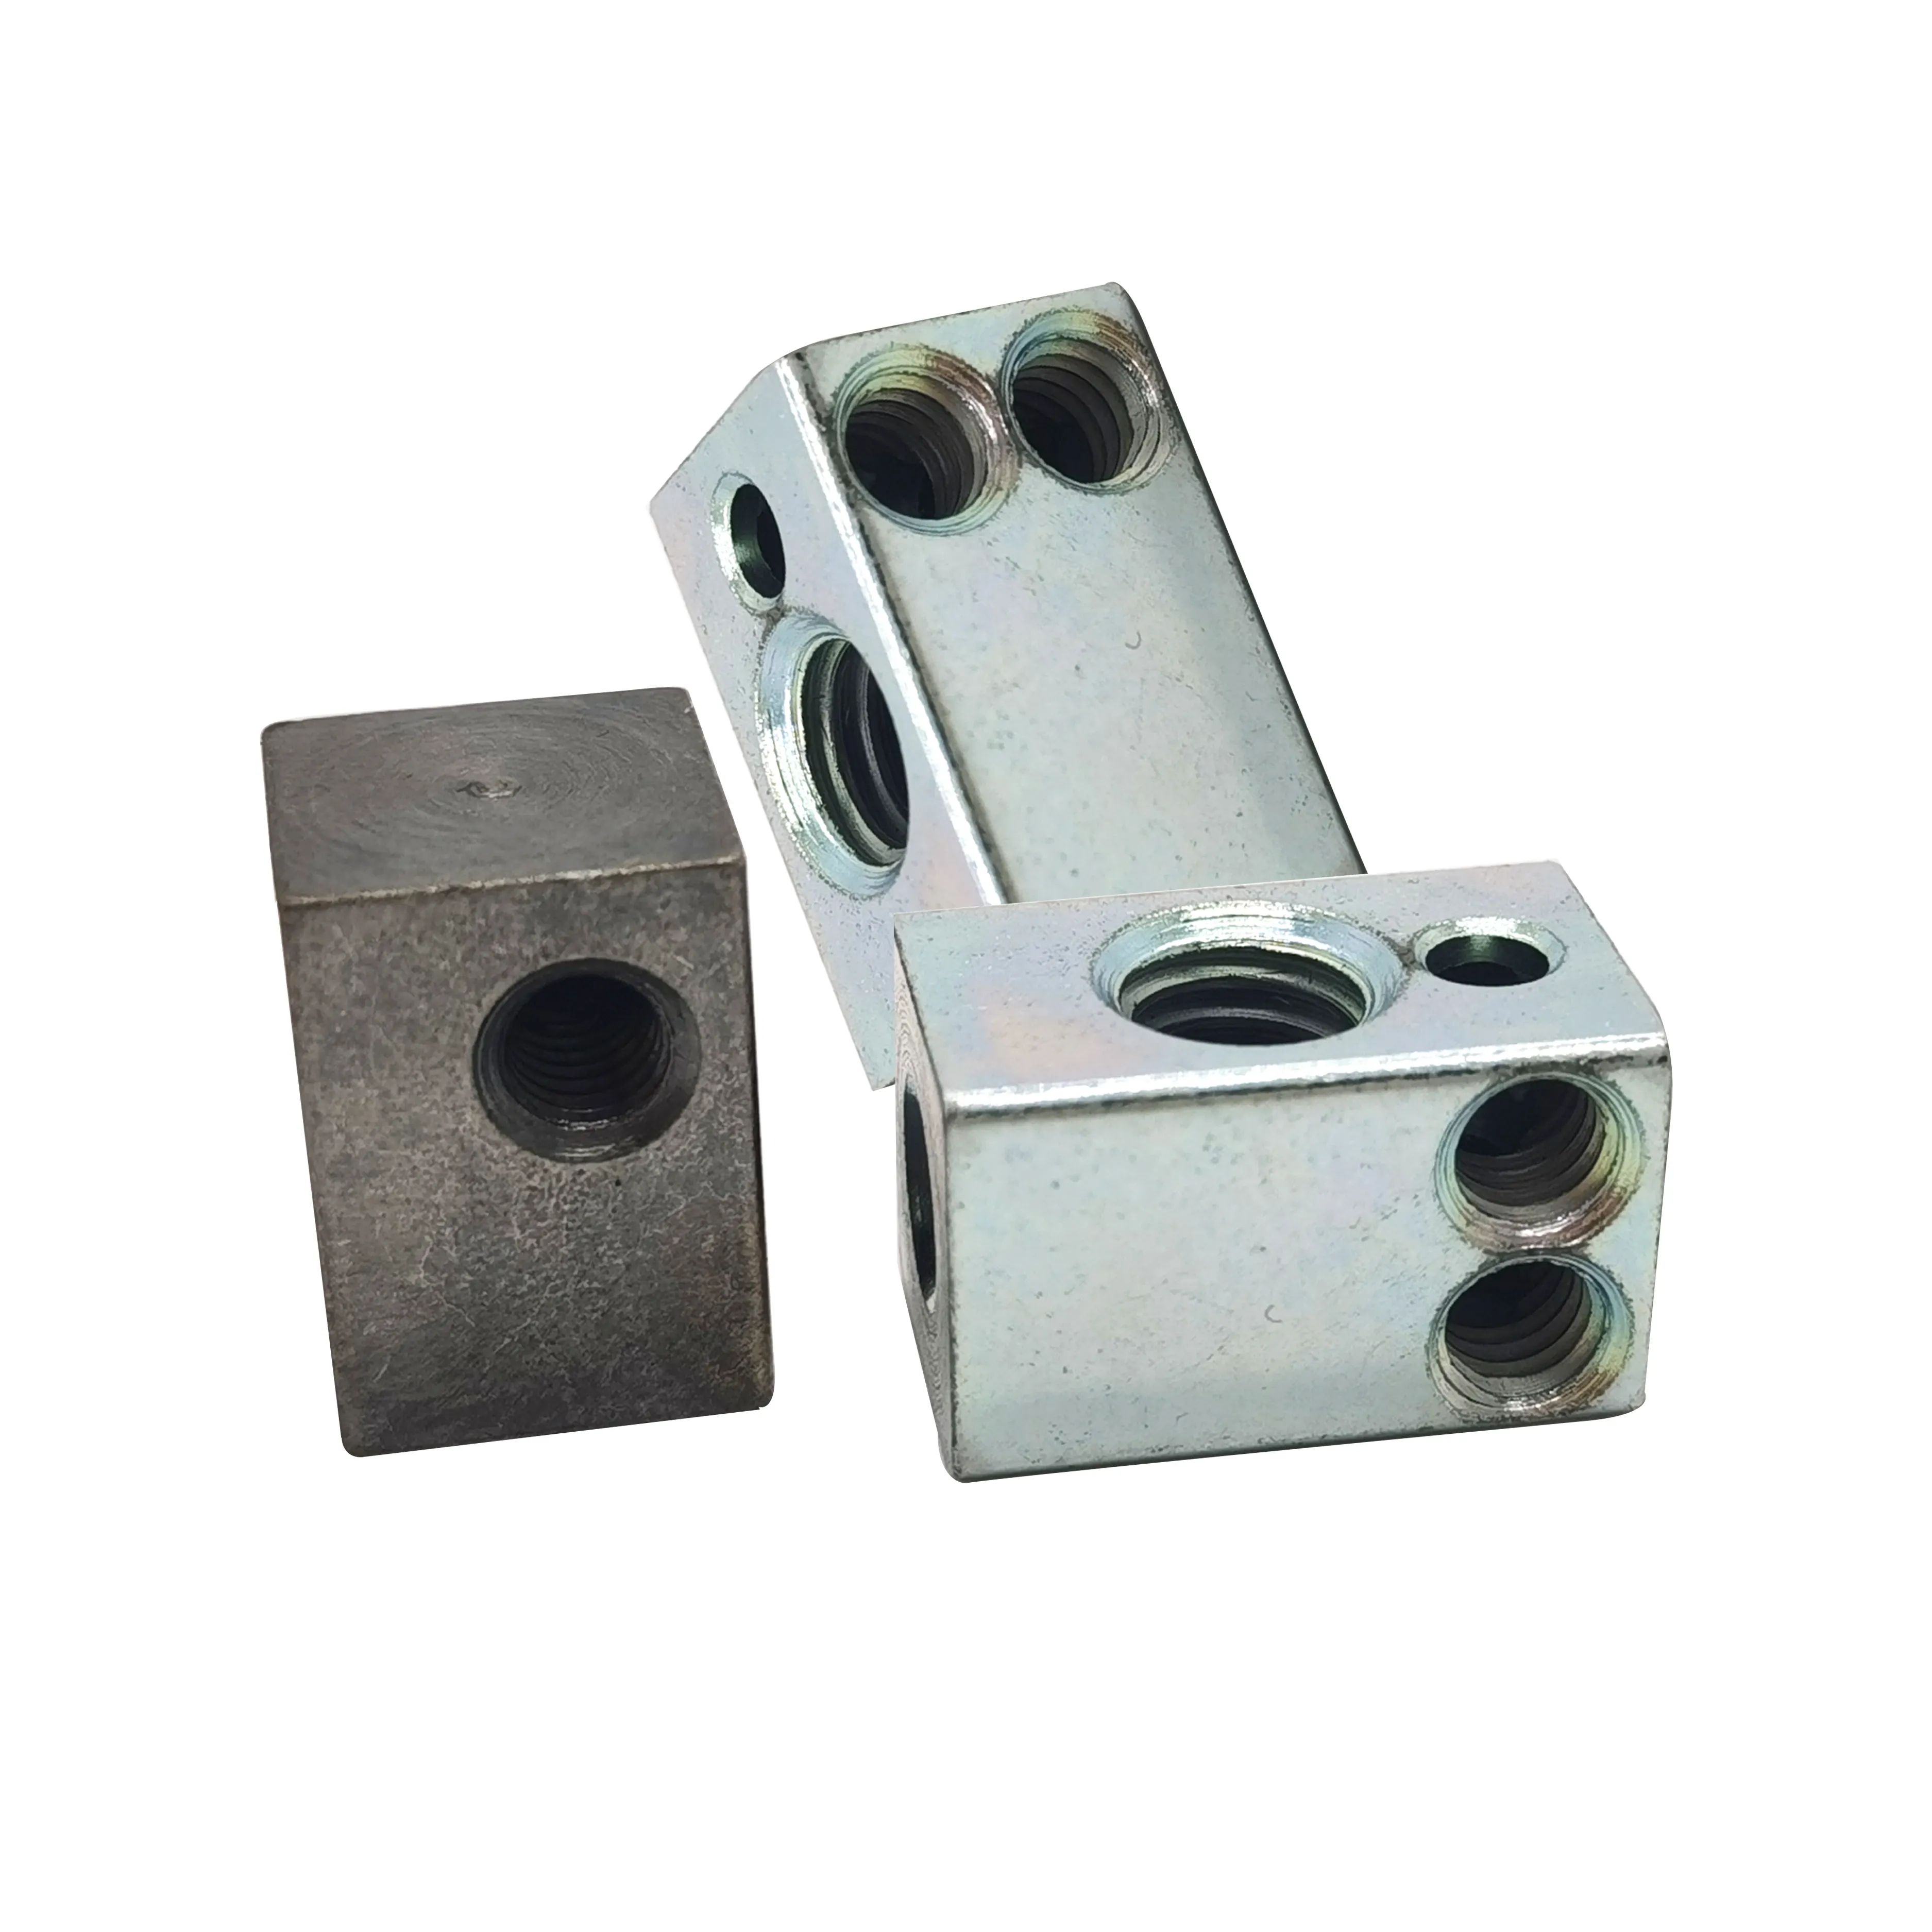 Carbon Steel Zinc Plated M2 M3 M4 M5 Square Nuts With Hole For Computer Audio Equipment With Three Hole